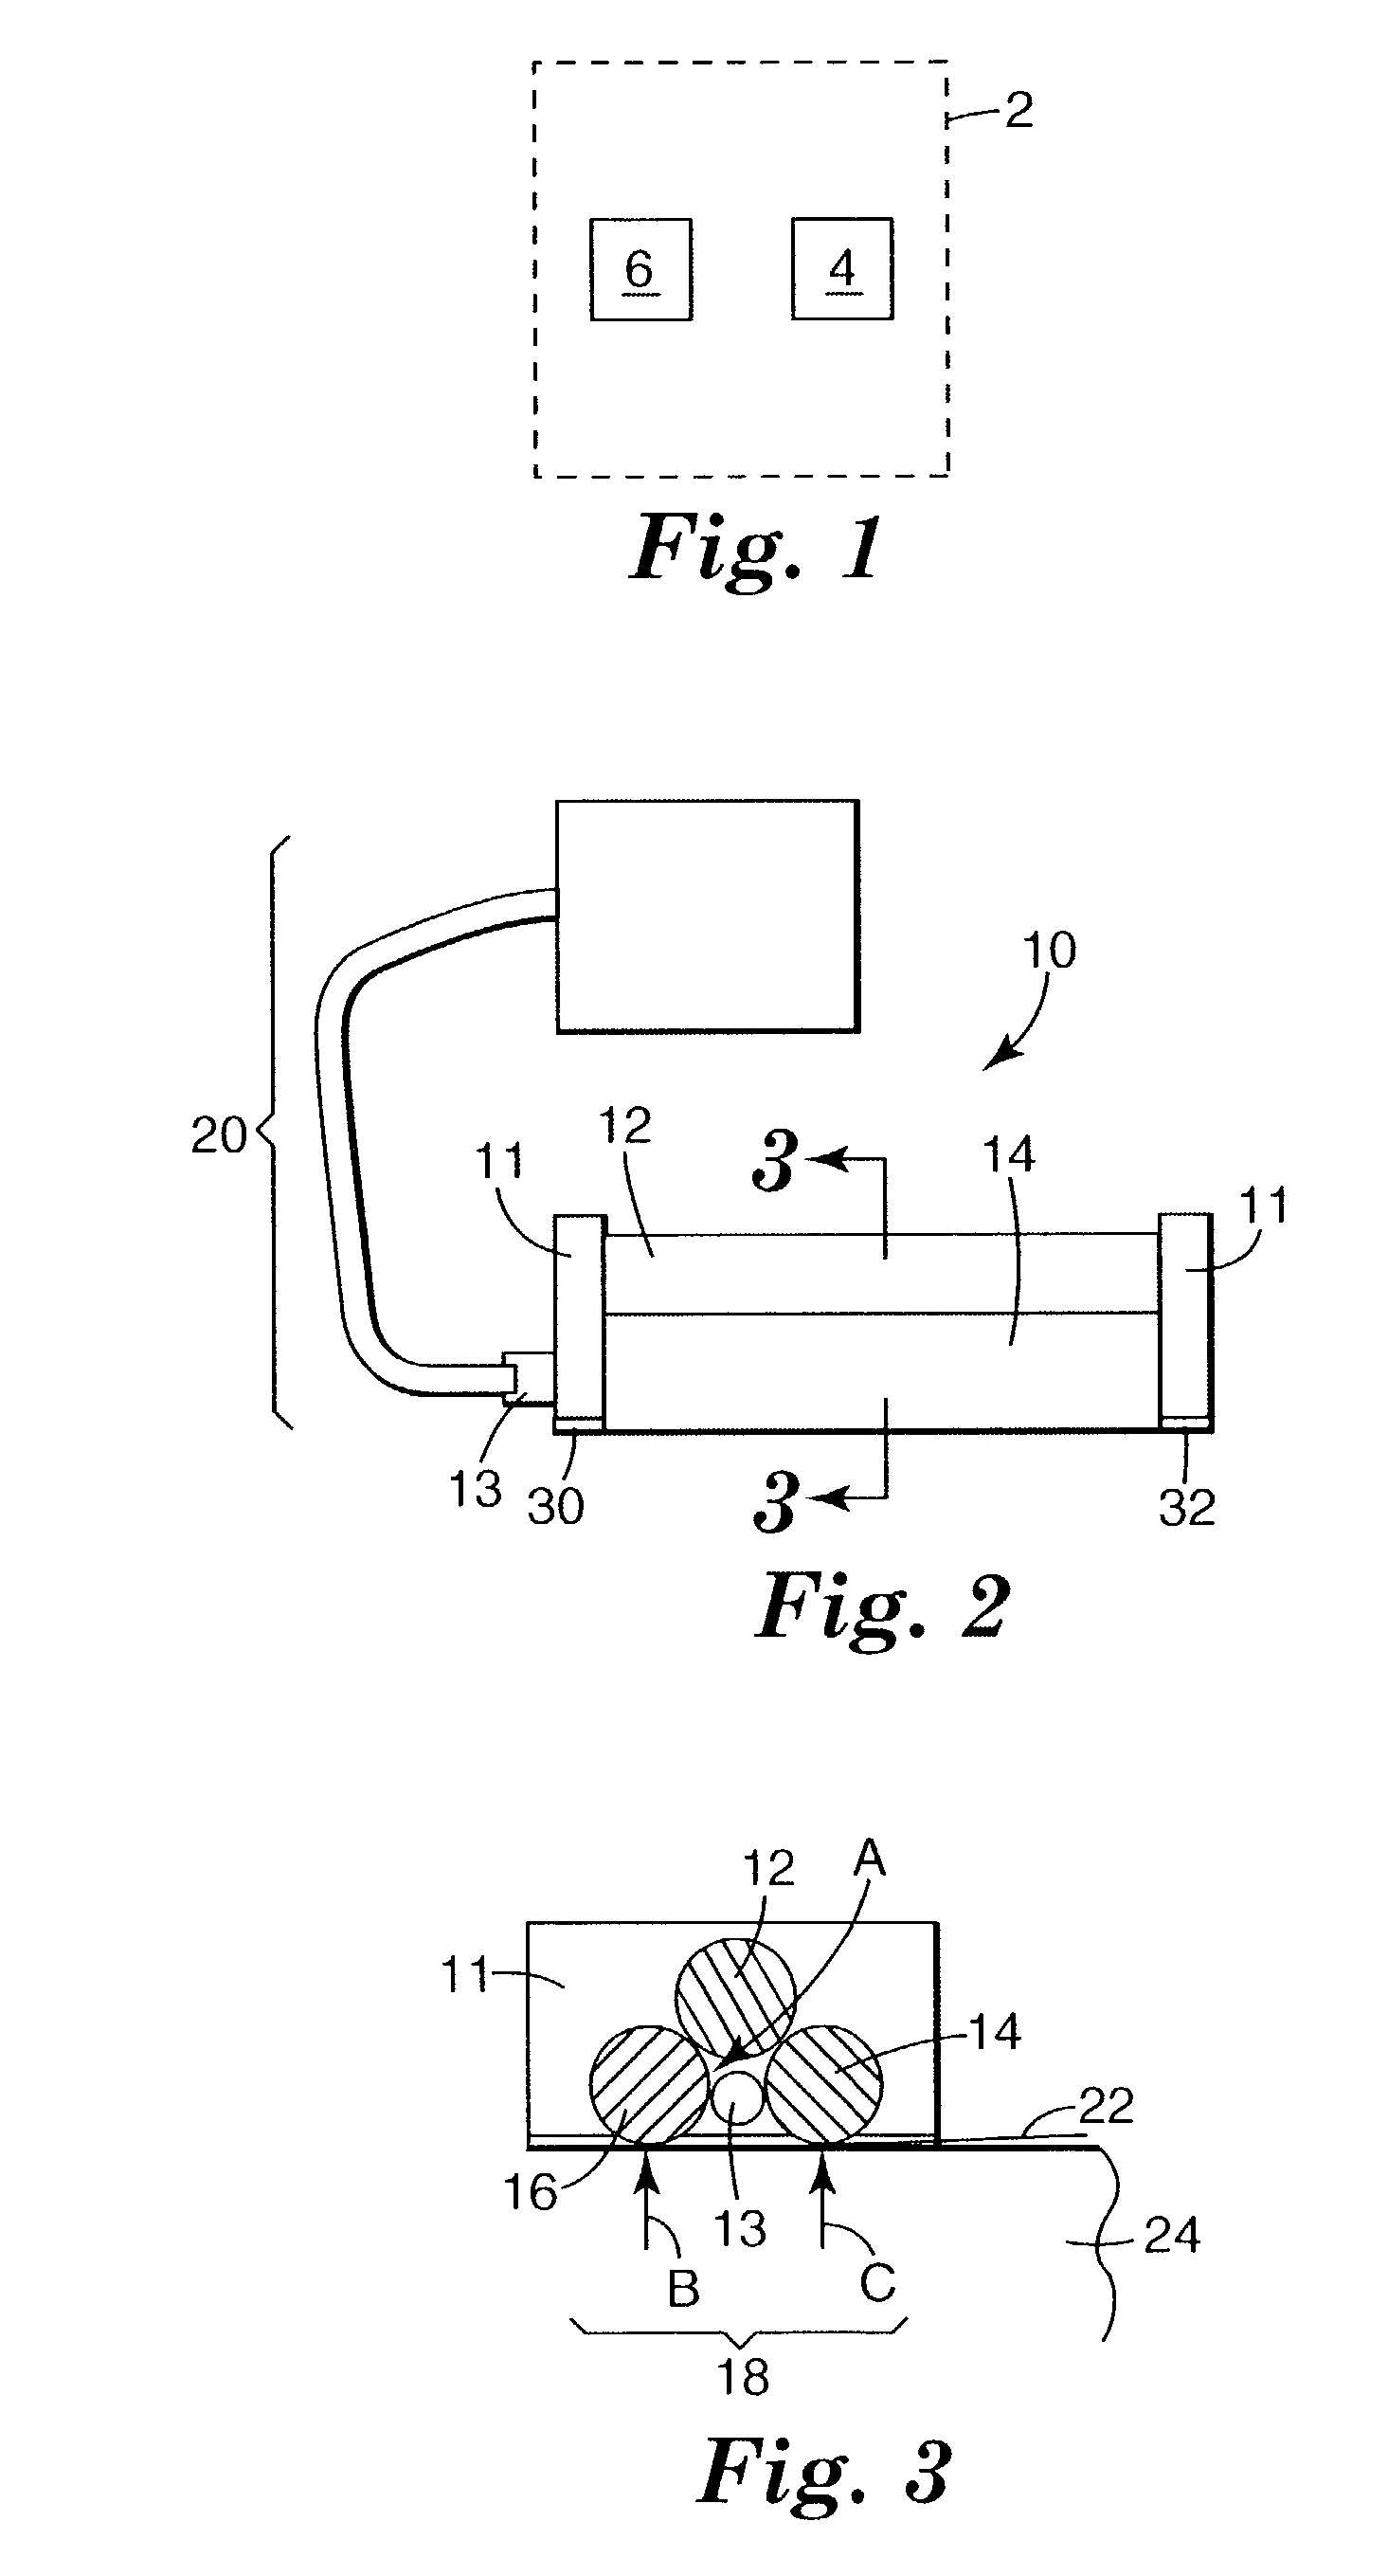 Film lamination and removal system and methods of use